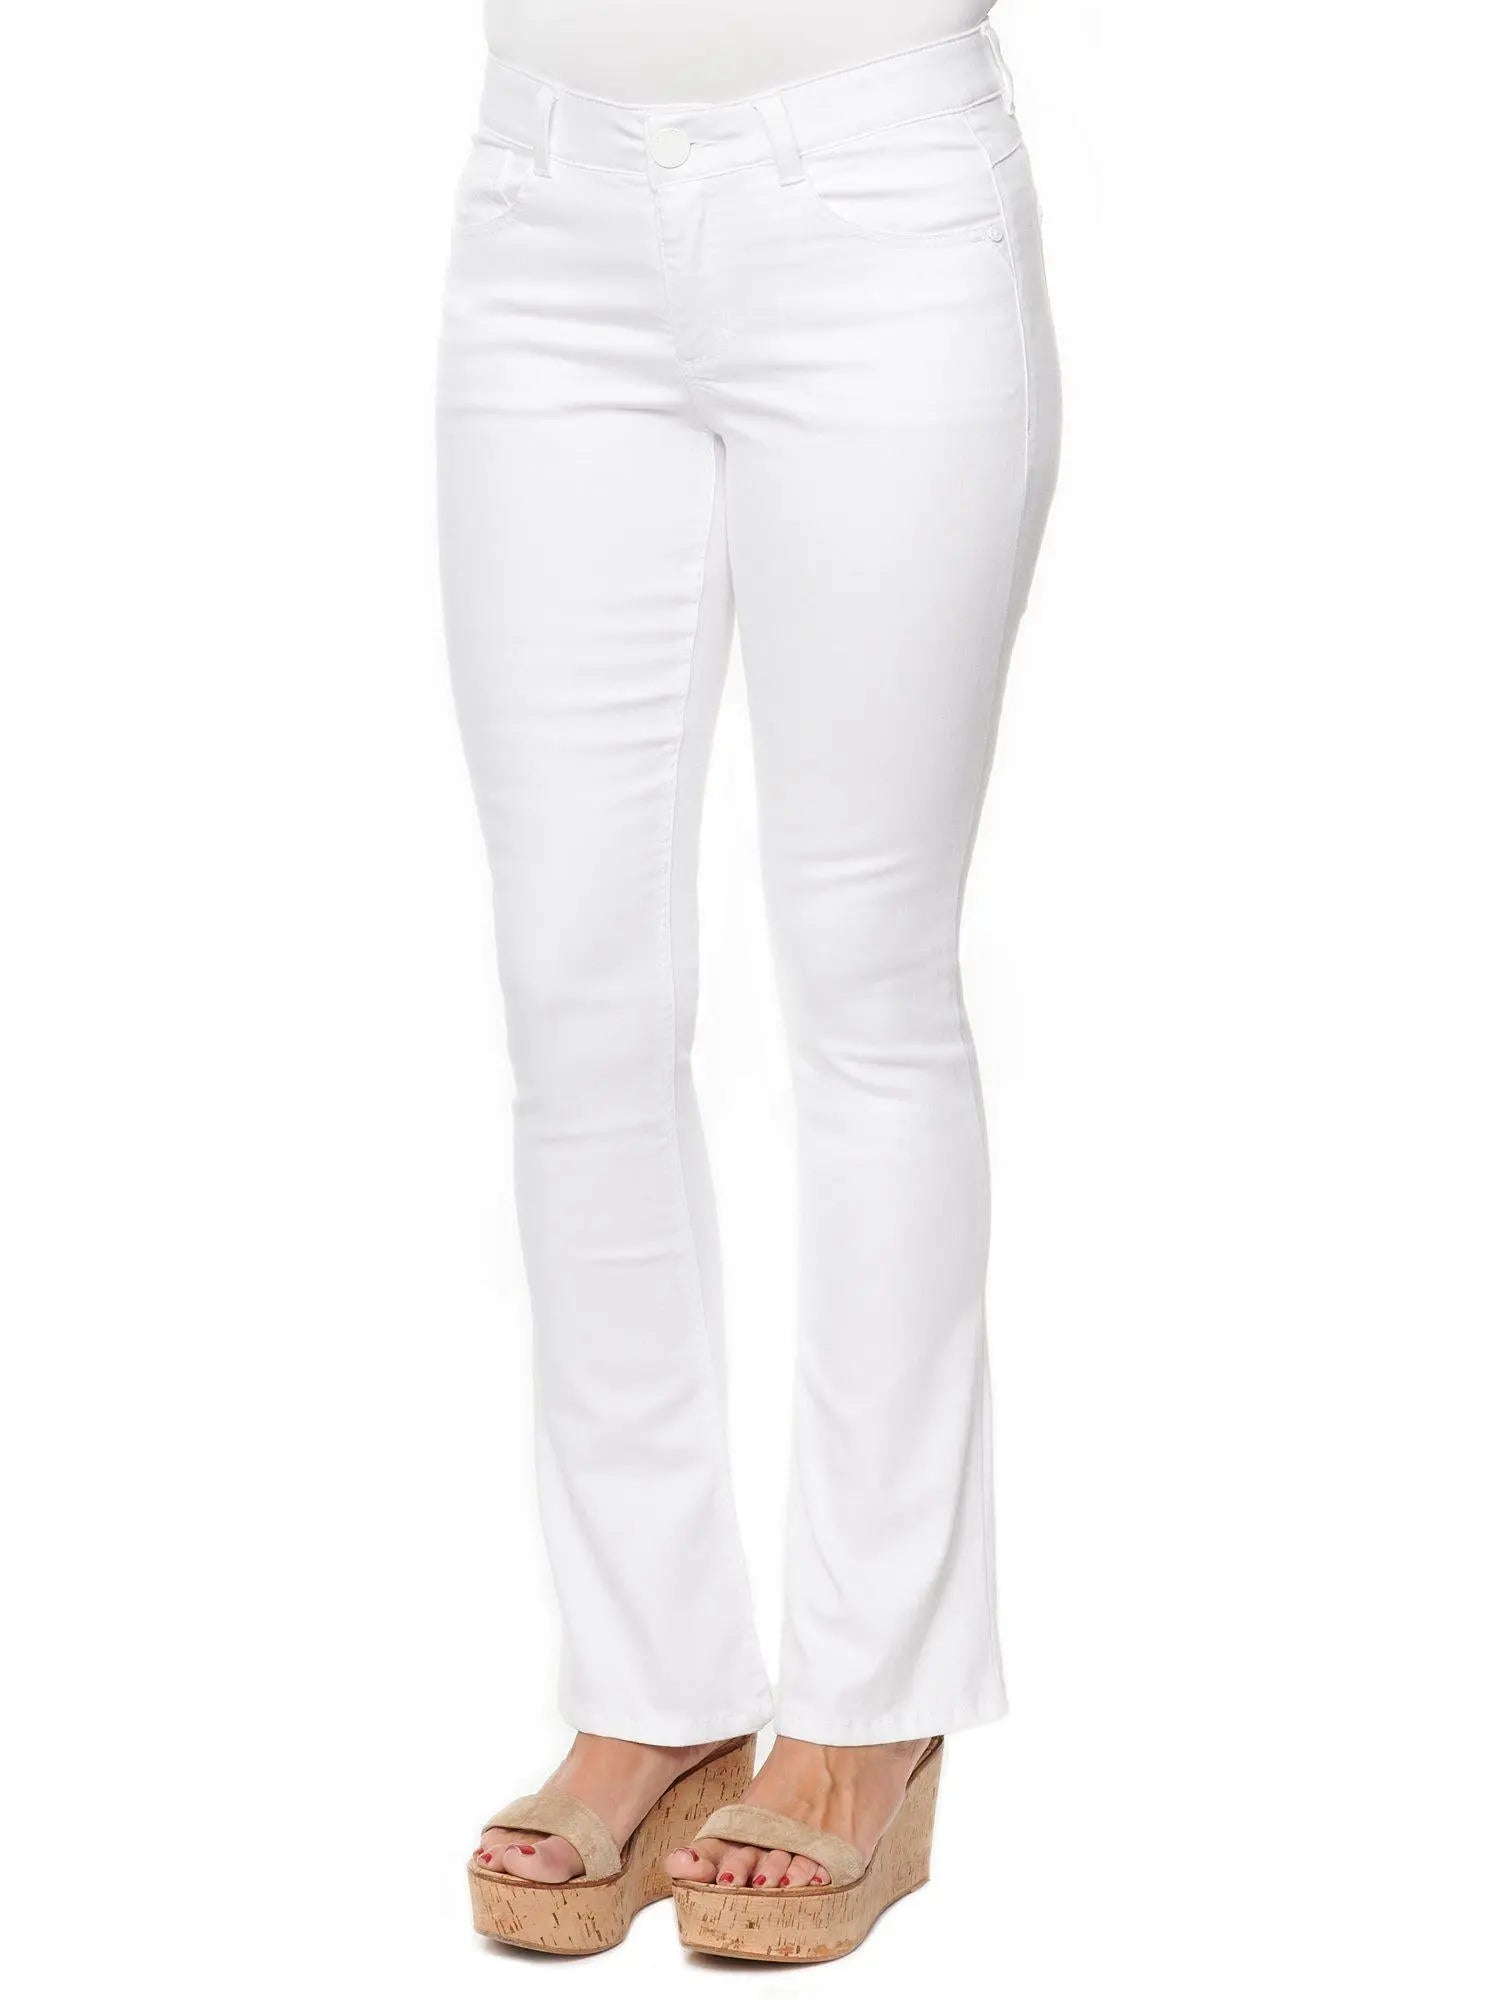 EIGHTYFIVE CONTRAST - Bootcut jeans - white/coloured denim